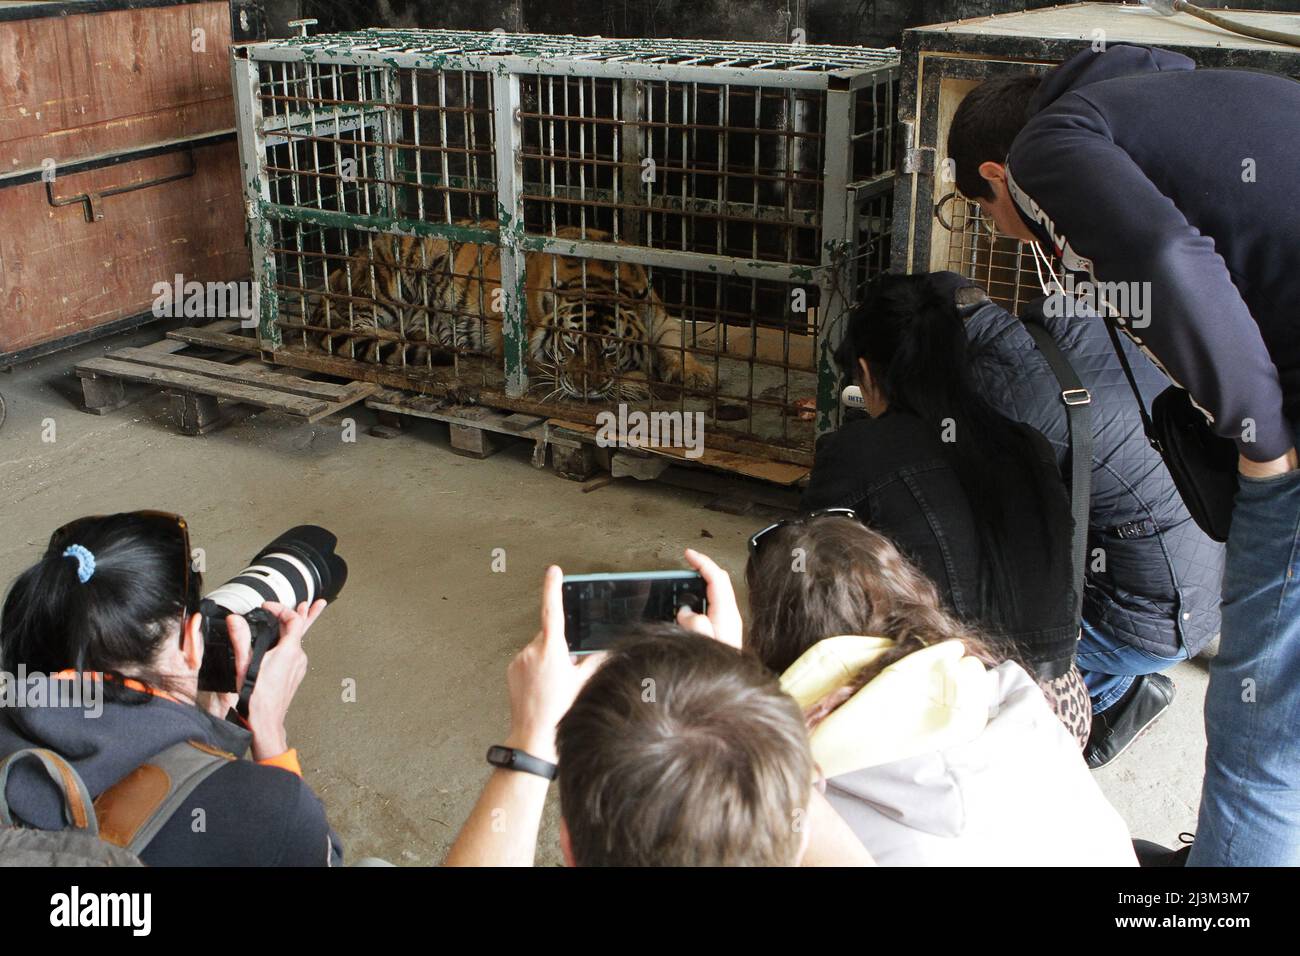 Dnipro, Ukraine. 08th Apr, 2022. Journalists take pictures of a tiger evacuated from the ruined Kharkiv Feldman Ecopark, Dnipro, central Ukraine, April 8, 2022. Feldman Ecopark “is no more,” founder Alexander Feldman said in a statement on Tuesday after the zoo was “subjected to massive shelling and bombardment” from Russian forces. The statement said the zoo’s “biggest problem” was large predators, such as lions, tigers and bears, which would pose a major danger to humans if they got out of the zoo and roamed free. Feldman said their enclosures were intact but couldn’t withstand more damage.  Stock Photo